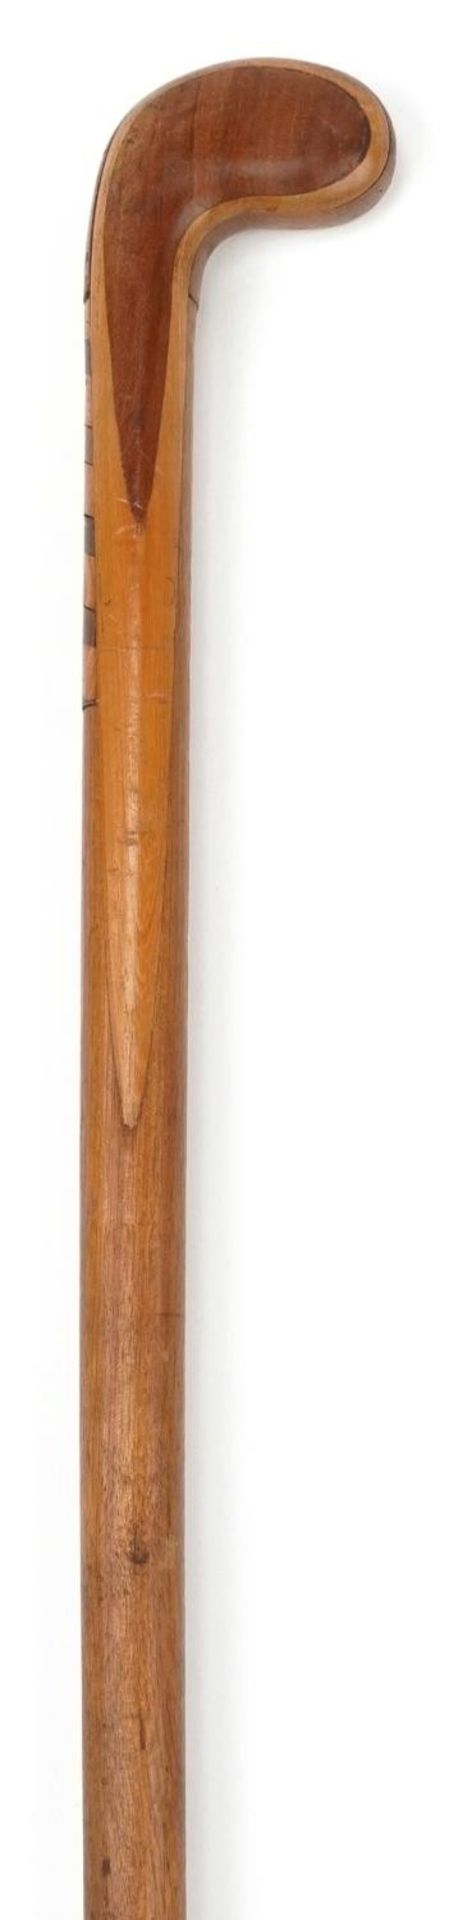 Inlaid wooden Sunday golf club walking stick, 87cm in length : For further information on this lot